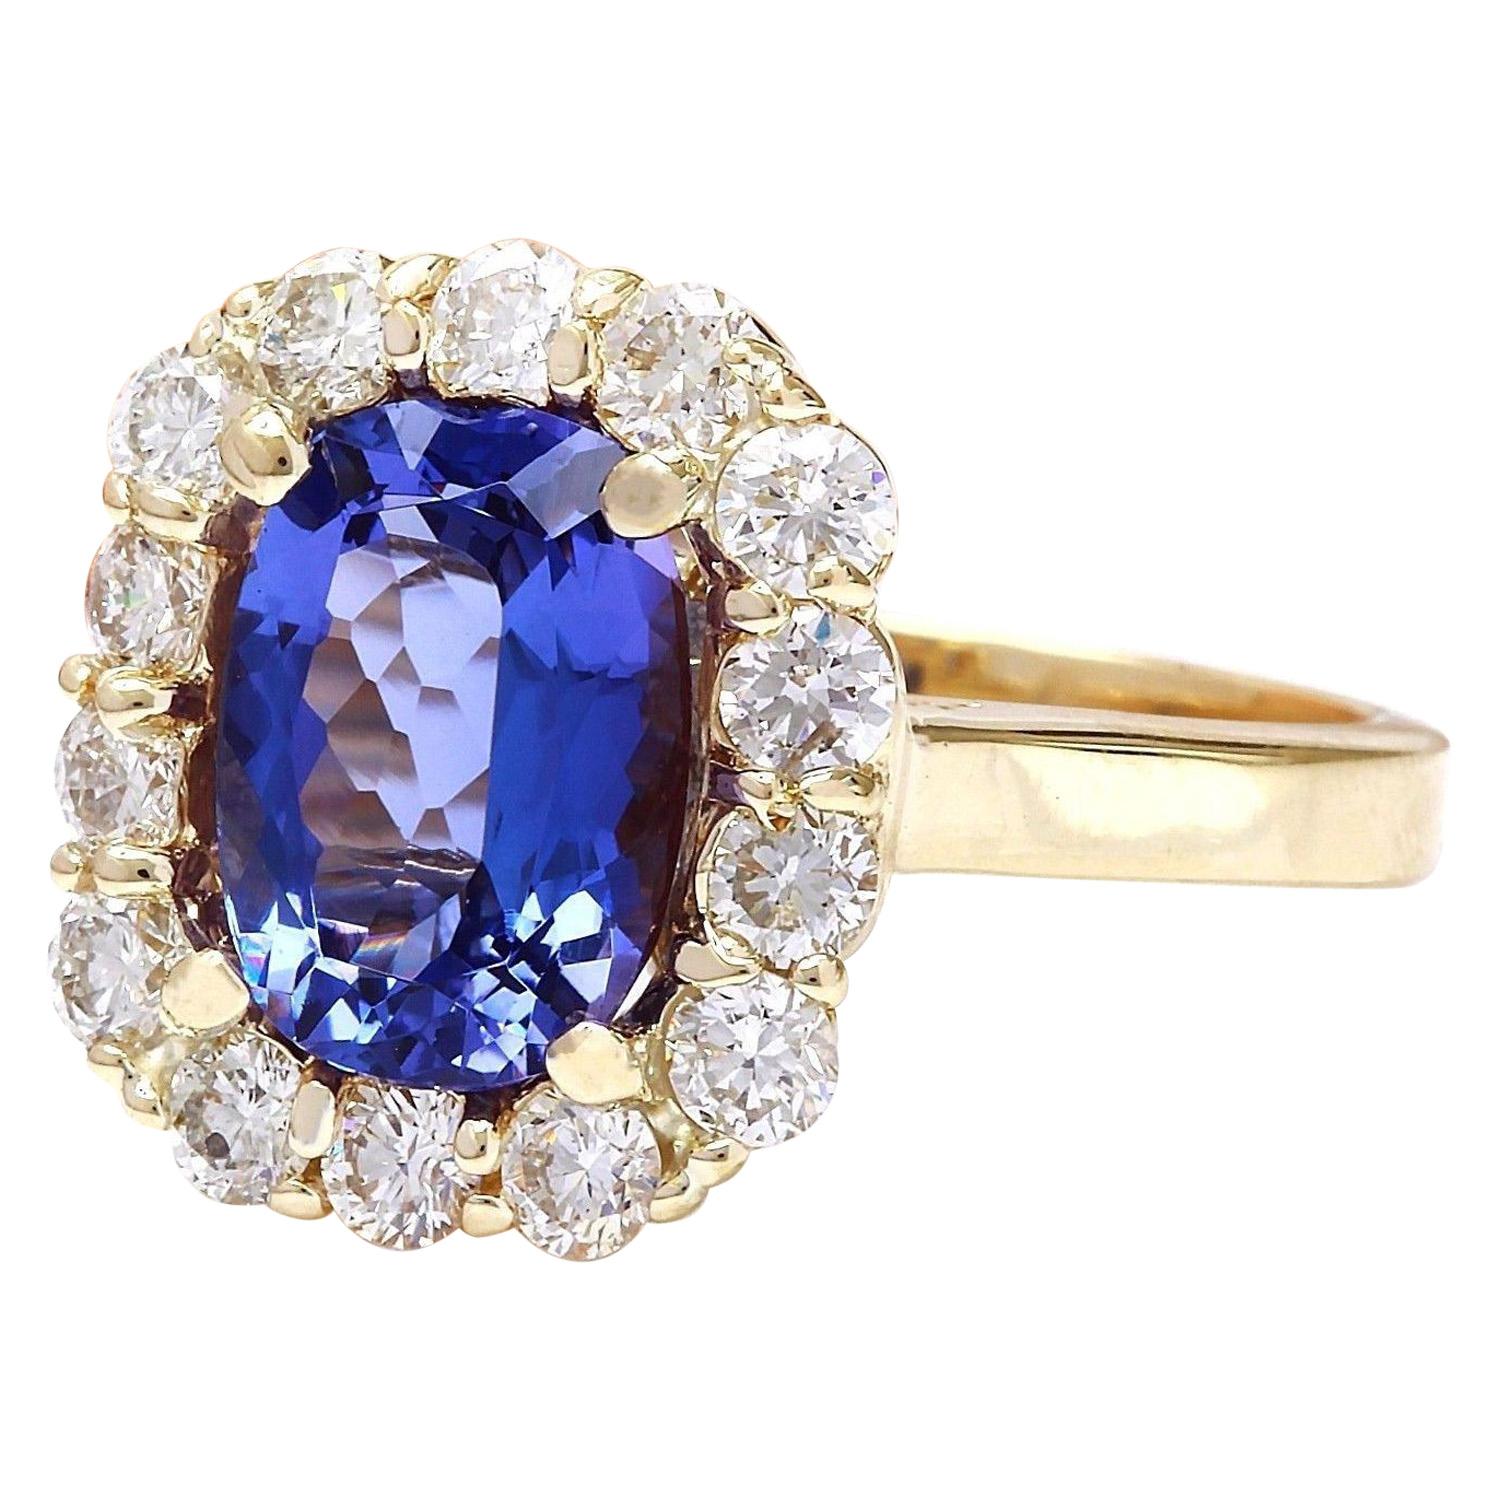 4.27 Carat Natural Tanzanite 14K Solid Yellow Gold Diamond Ring
 Item Type: Ring
 Item Style: Engagement
 Material: 14K Yellow Gold
 Mainstone: Tanzanite
 Stone Color: Blue
 Stone Weight: 3.27 Carat
 Stone Shape: Oval
 Stone Quantity: 1
 Stone